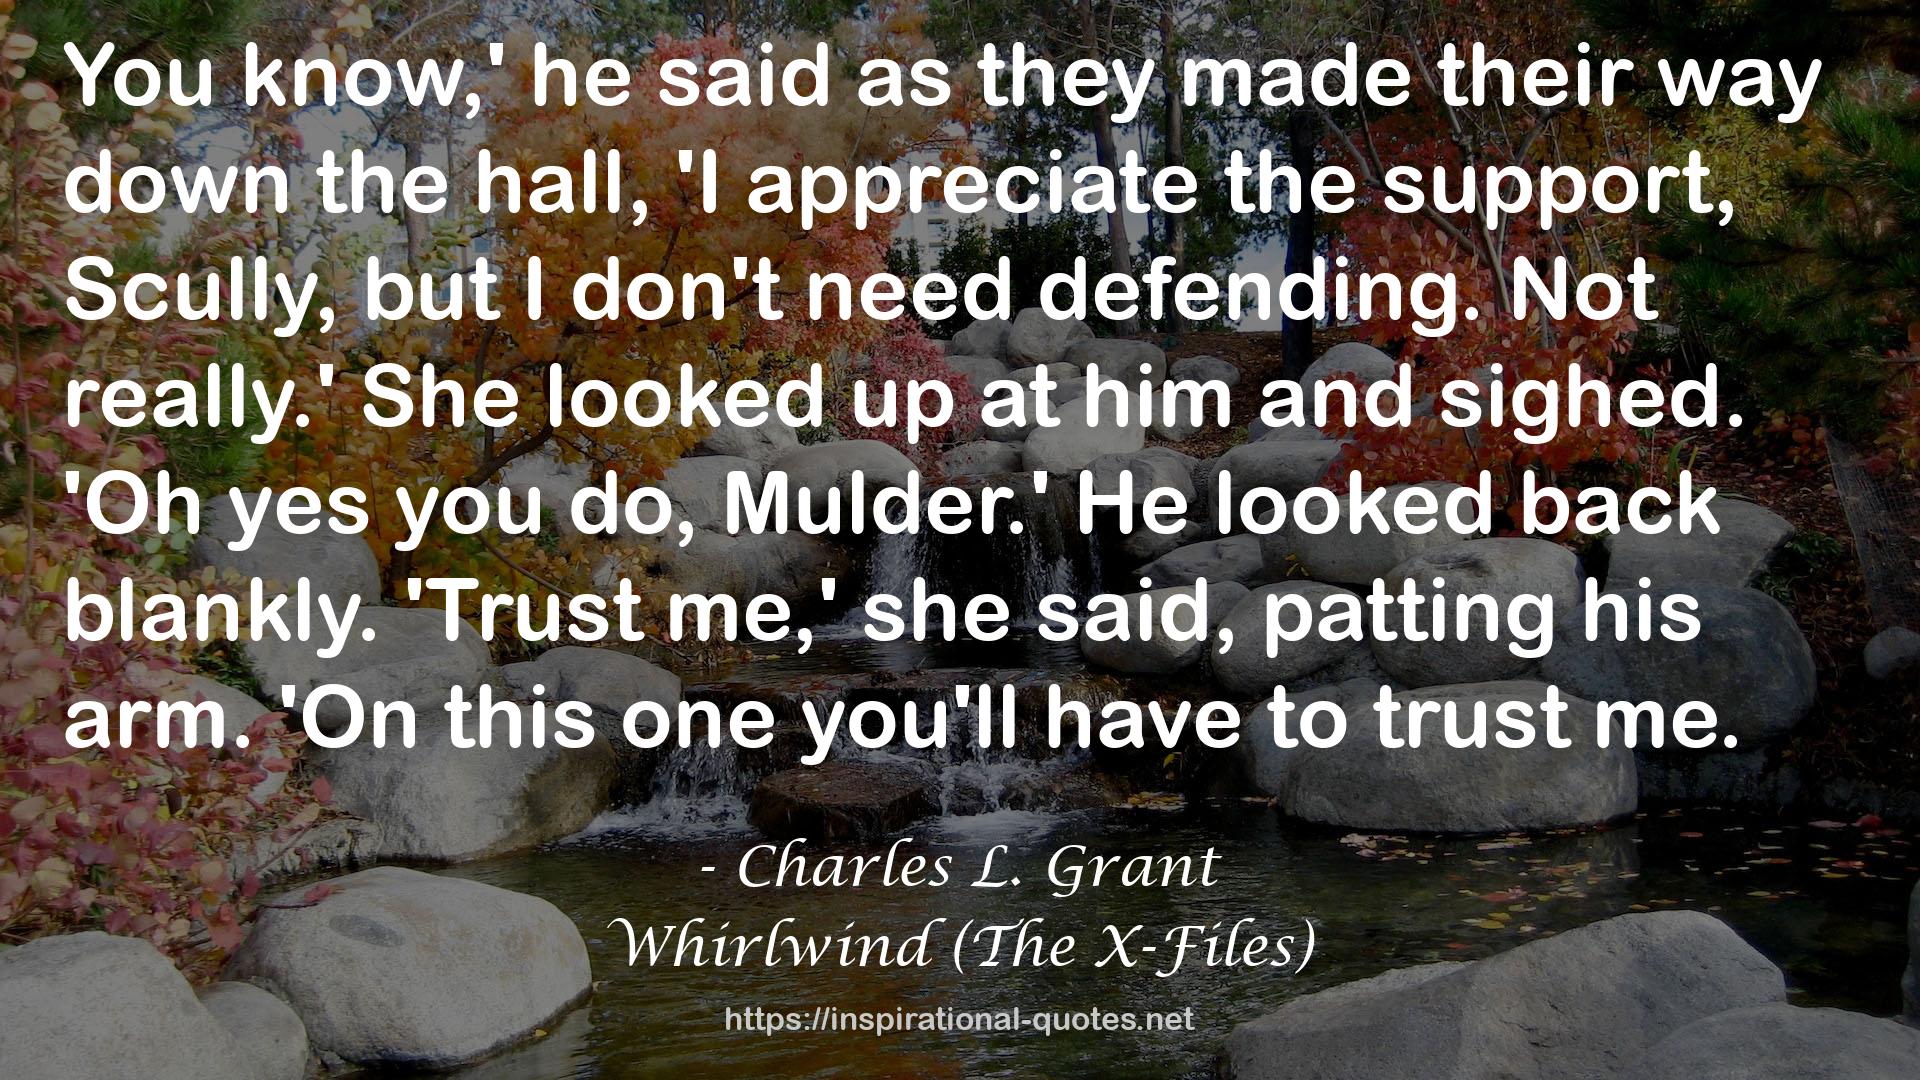 Whirlwind (The X-Files) QUOTES